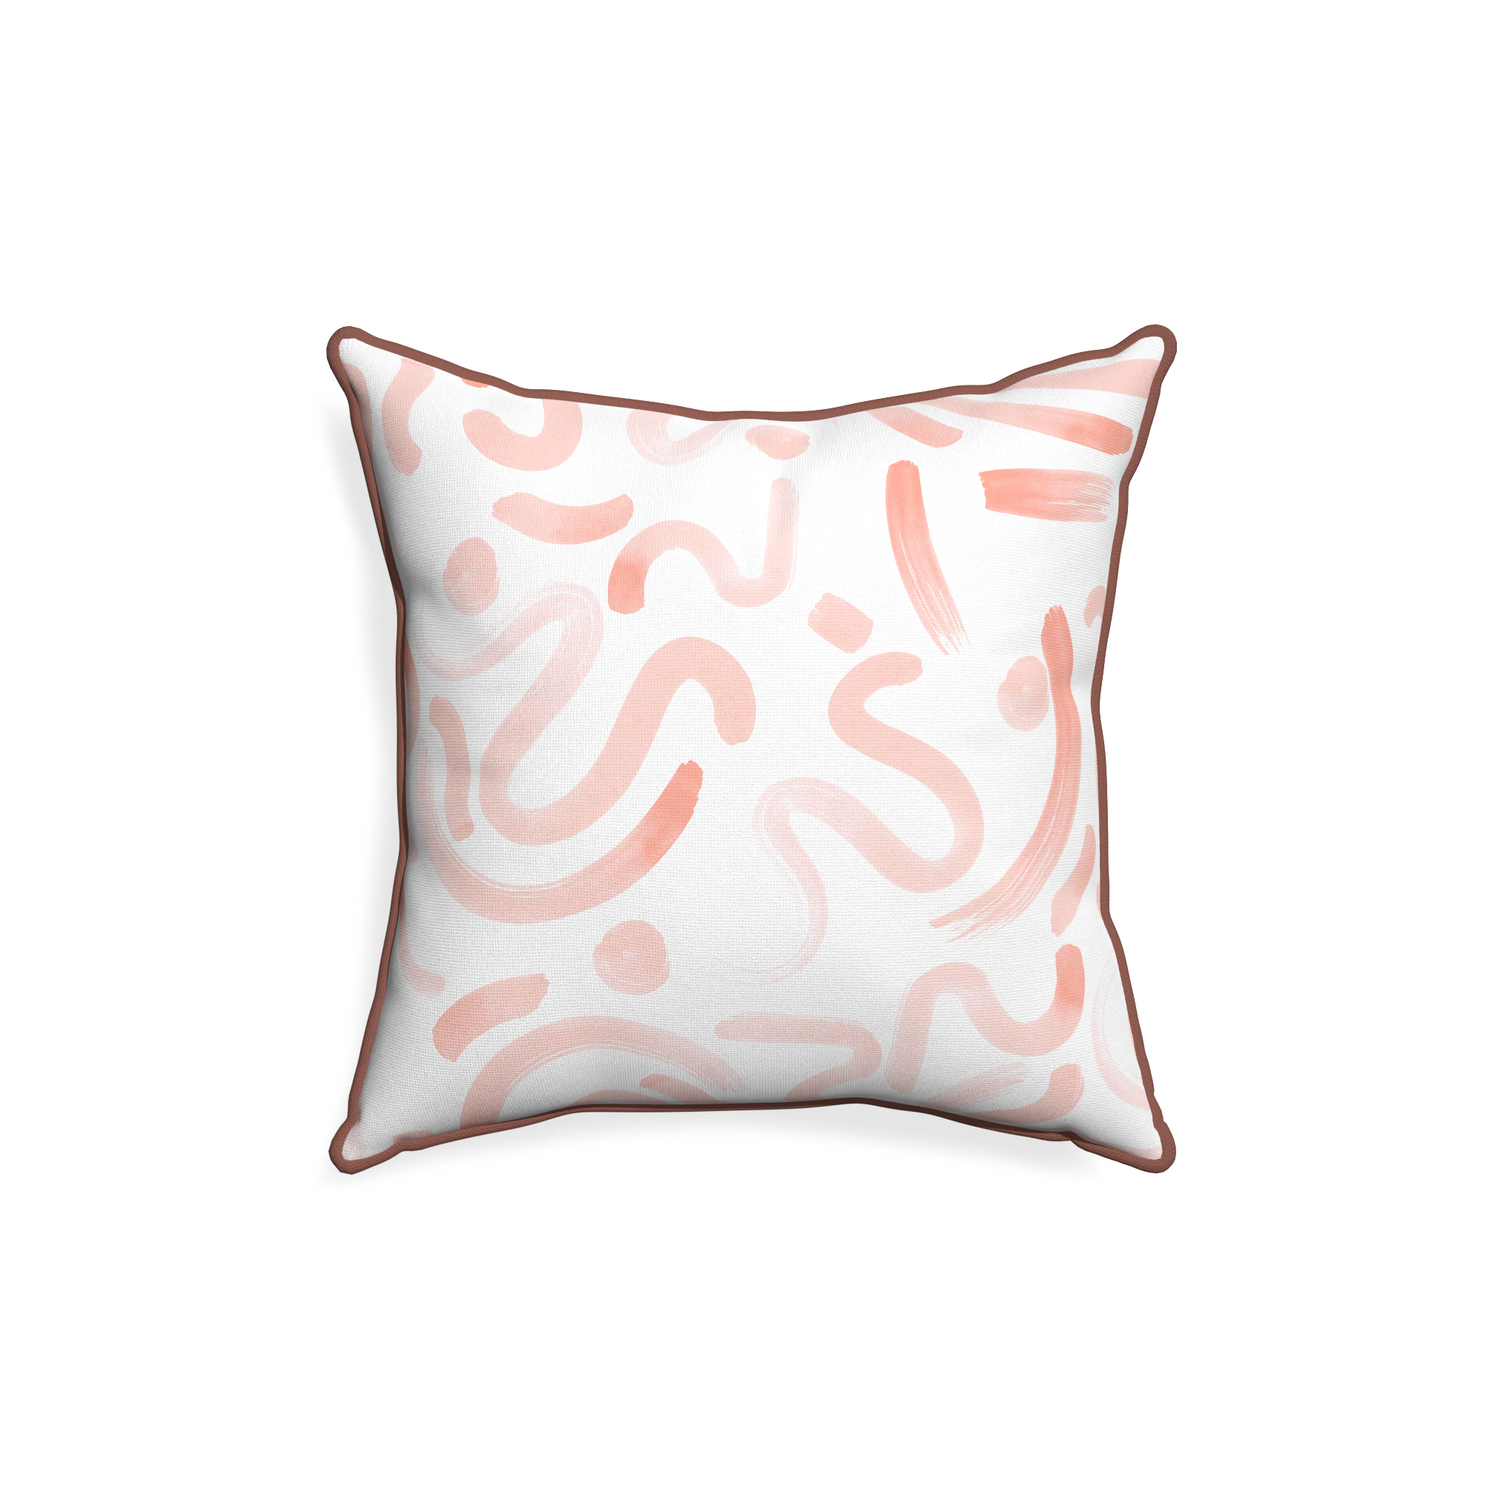 18-square hockney pink custom pillow with w piping on white background